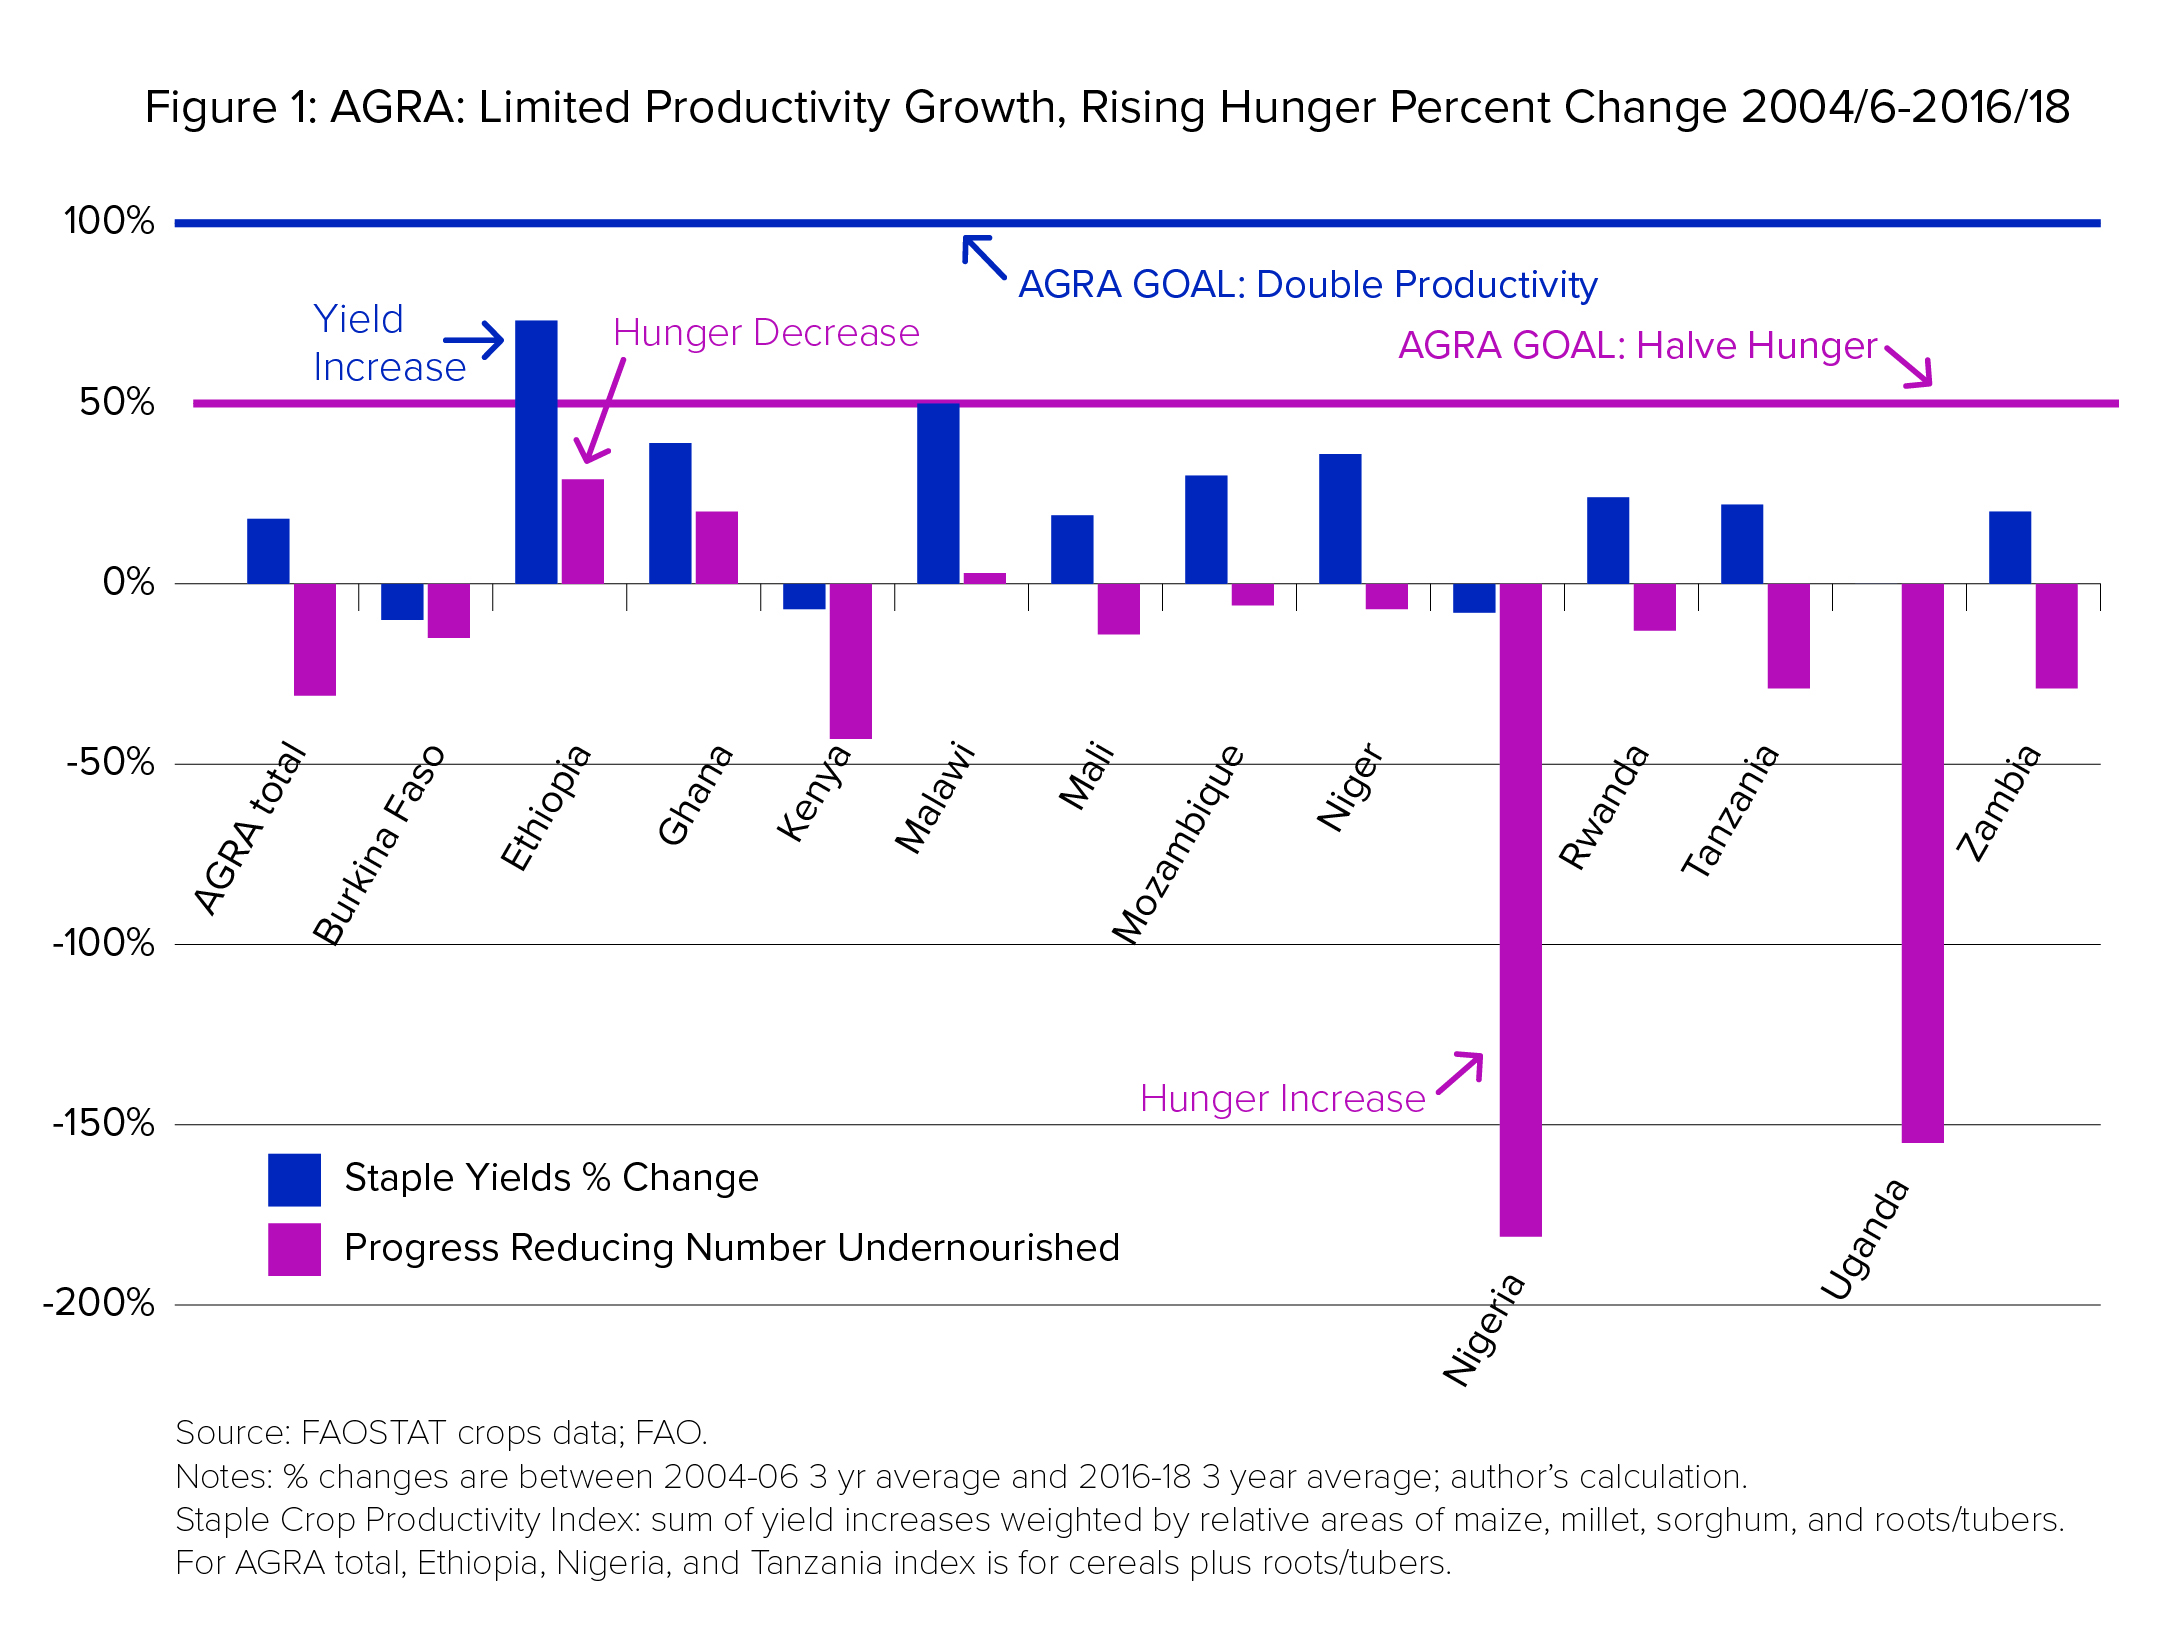 Figure 1: AGRA: Limited Productivity Growth, Rising Hunger Percent Change 2004/6-2016/18